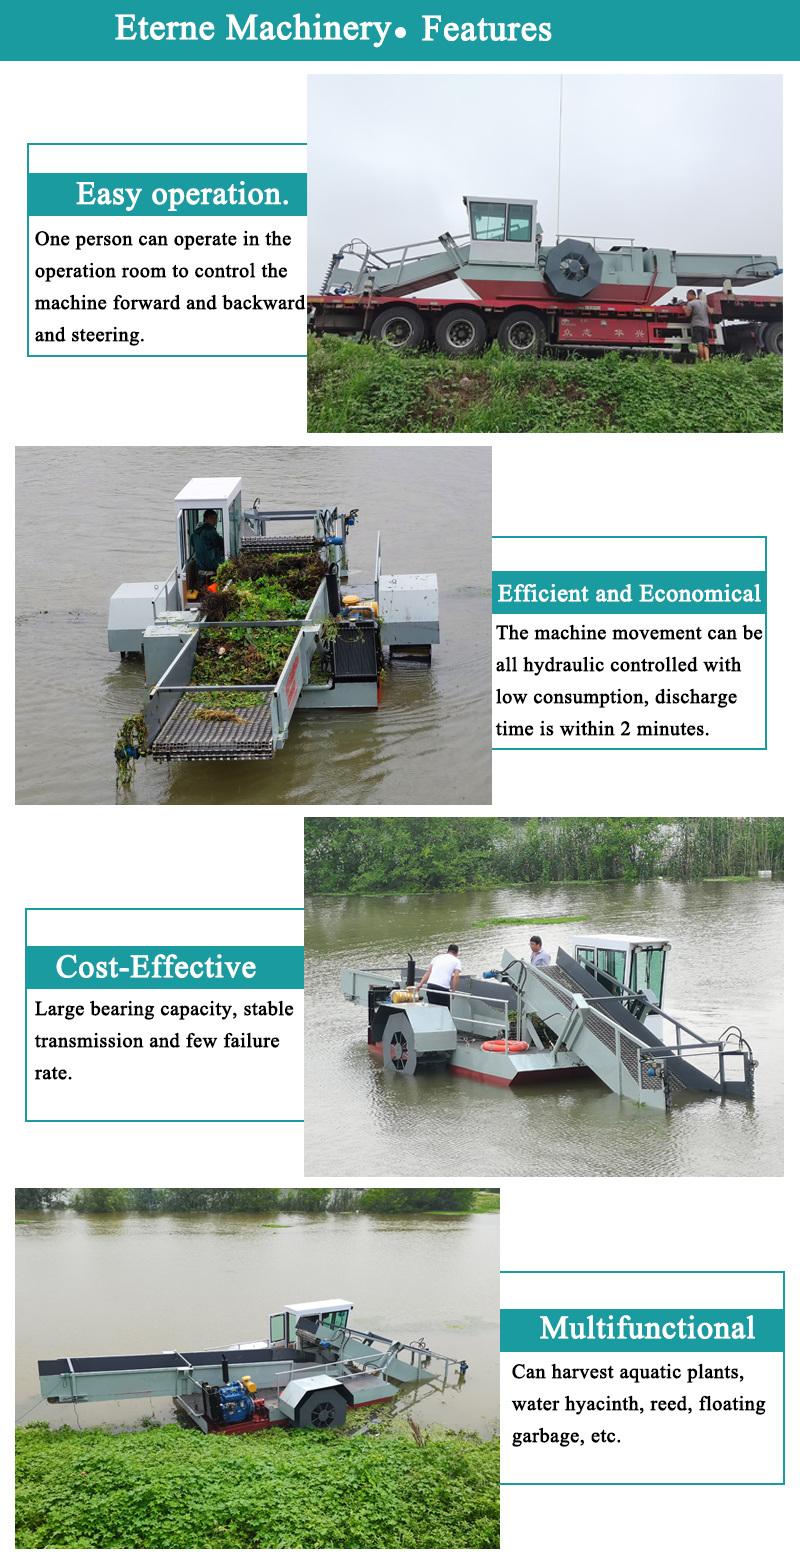 Et Hyacinth Reed Cutter Cutting Ship /Rubbish Collection Cleaning Boat Vessel Trash Skimmer Water Clean Machine in Lake River Dam Aquatic Weed Harvester